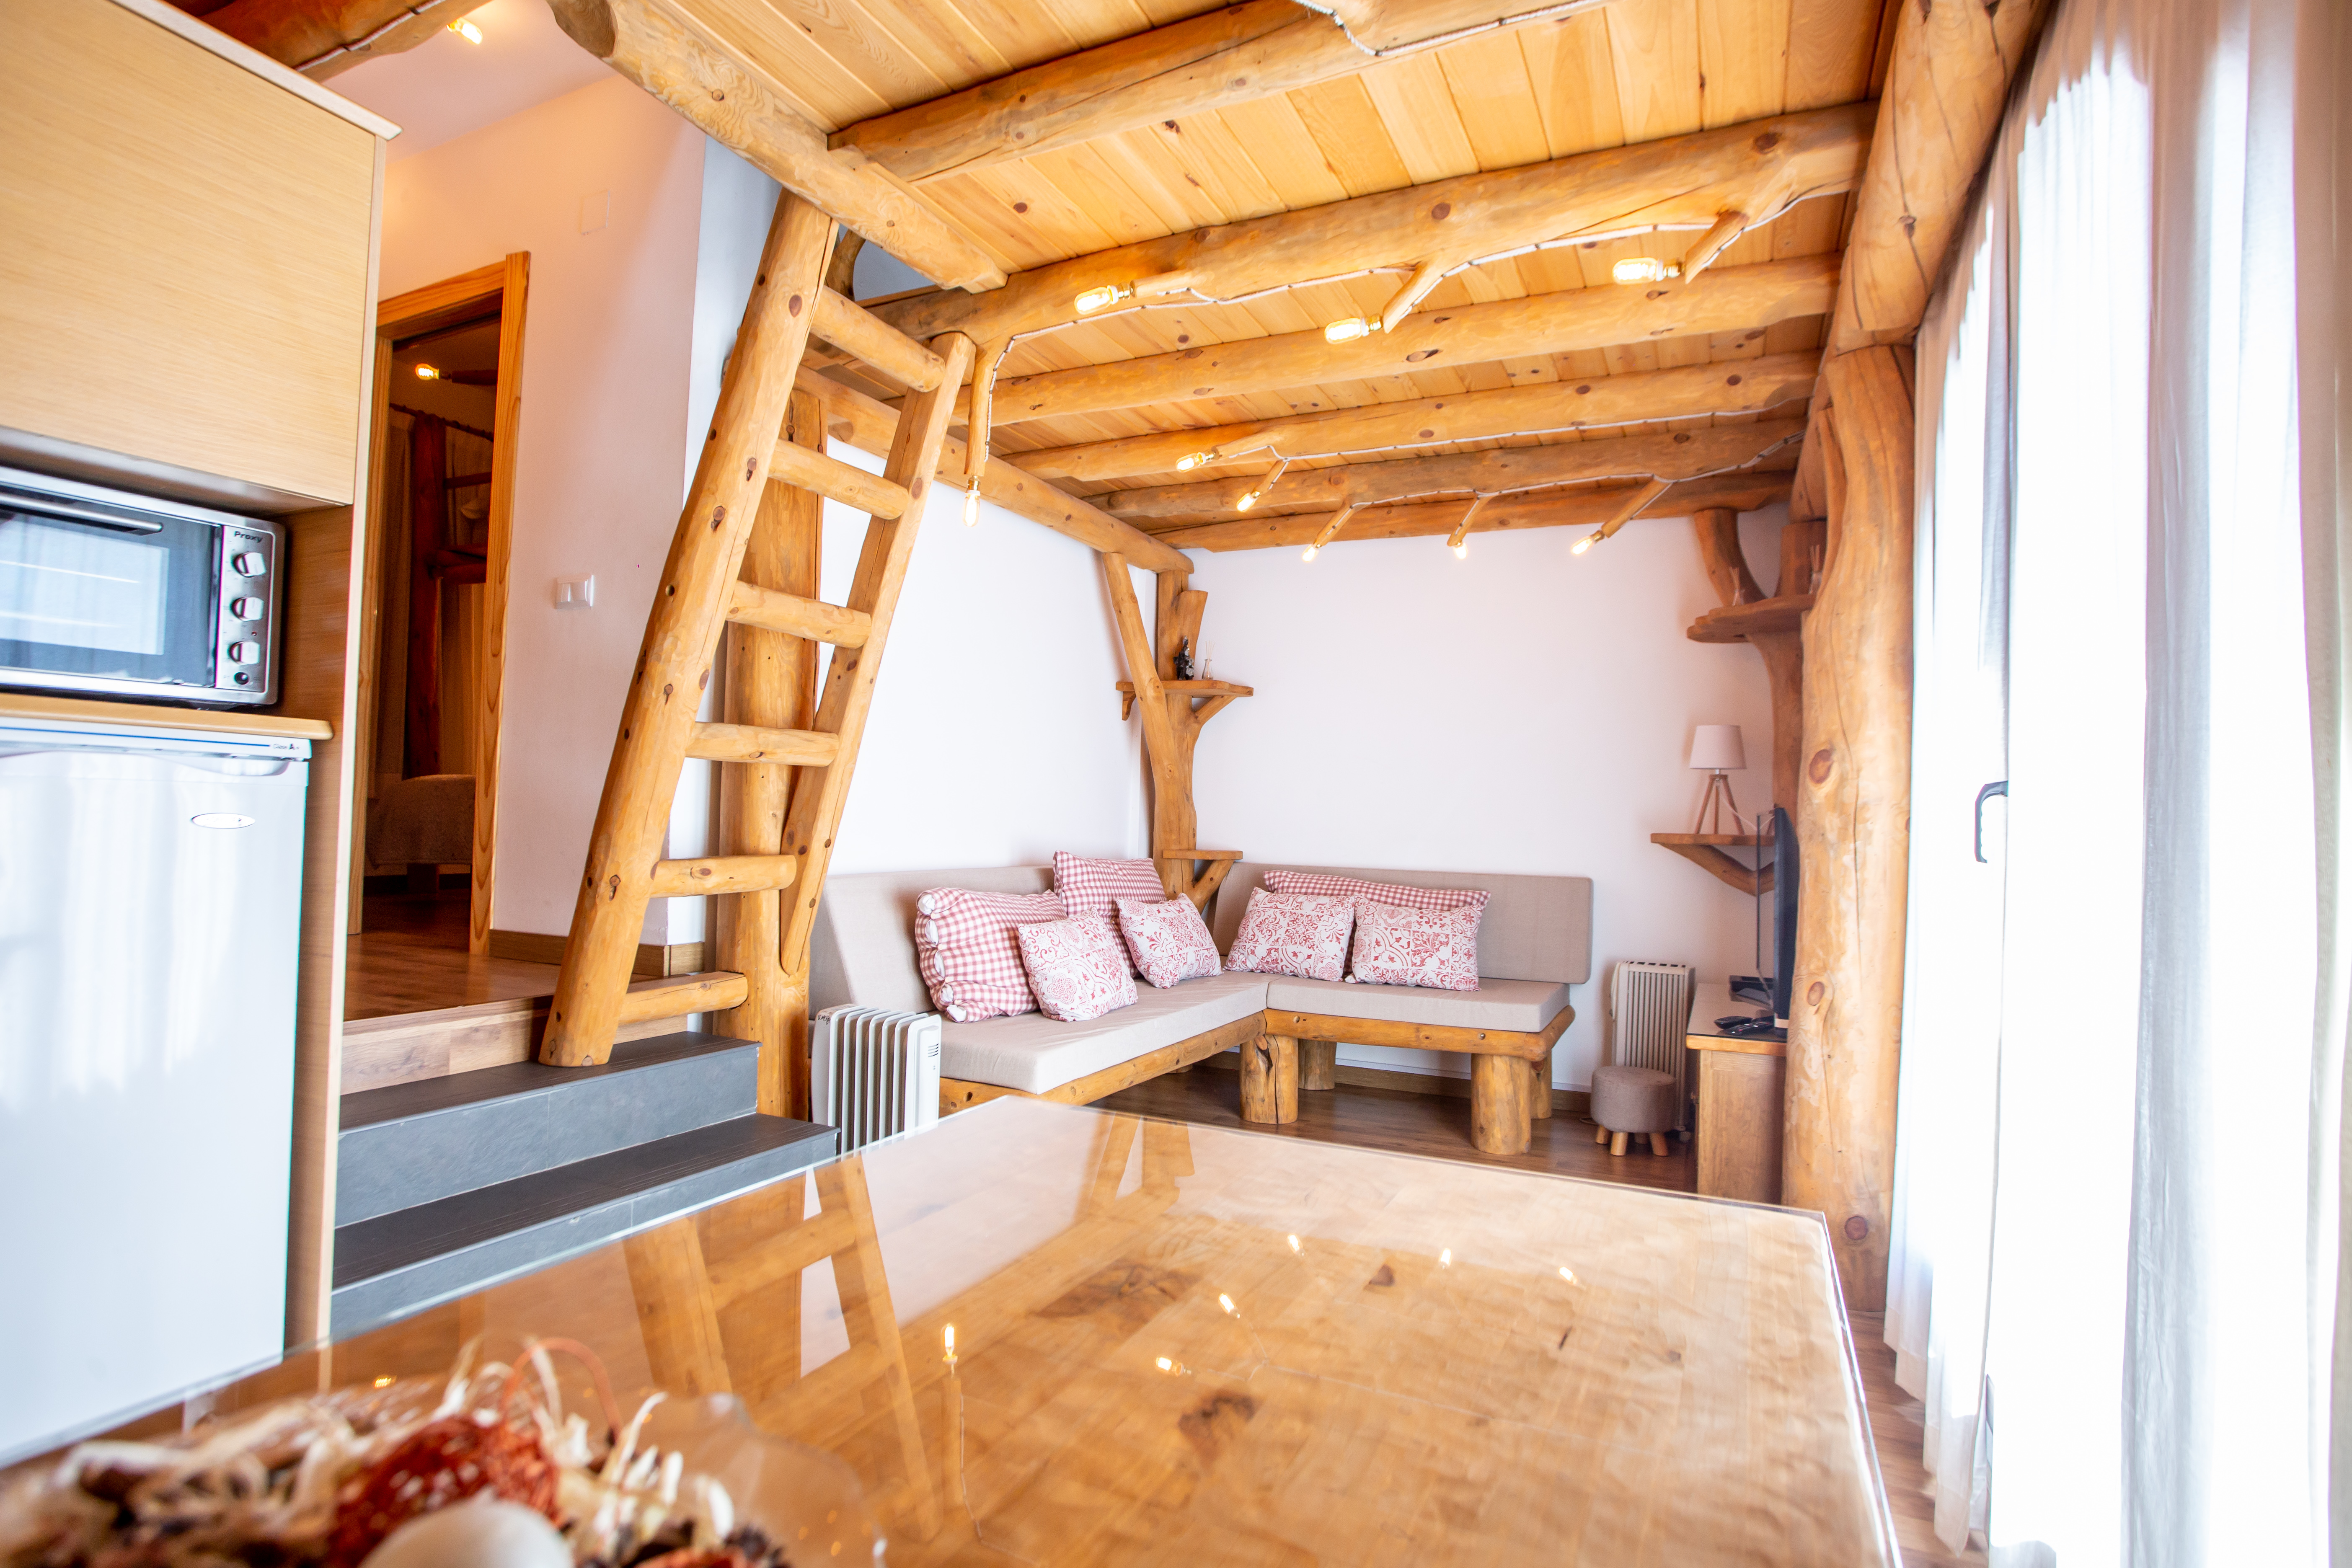 SNOW APARTMENT - Houses for Rent in Sierra Nevada, Andalucía, Spain - Airbnb